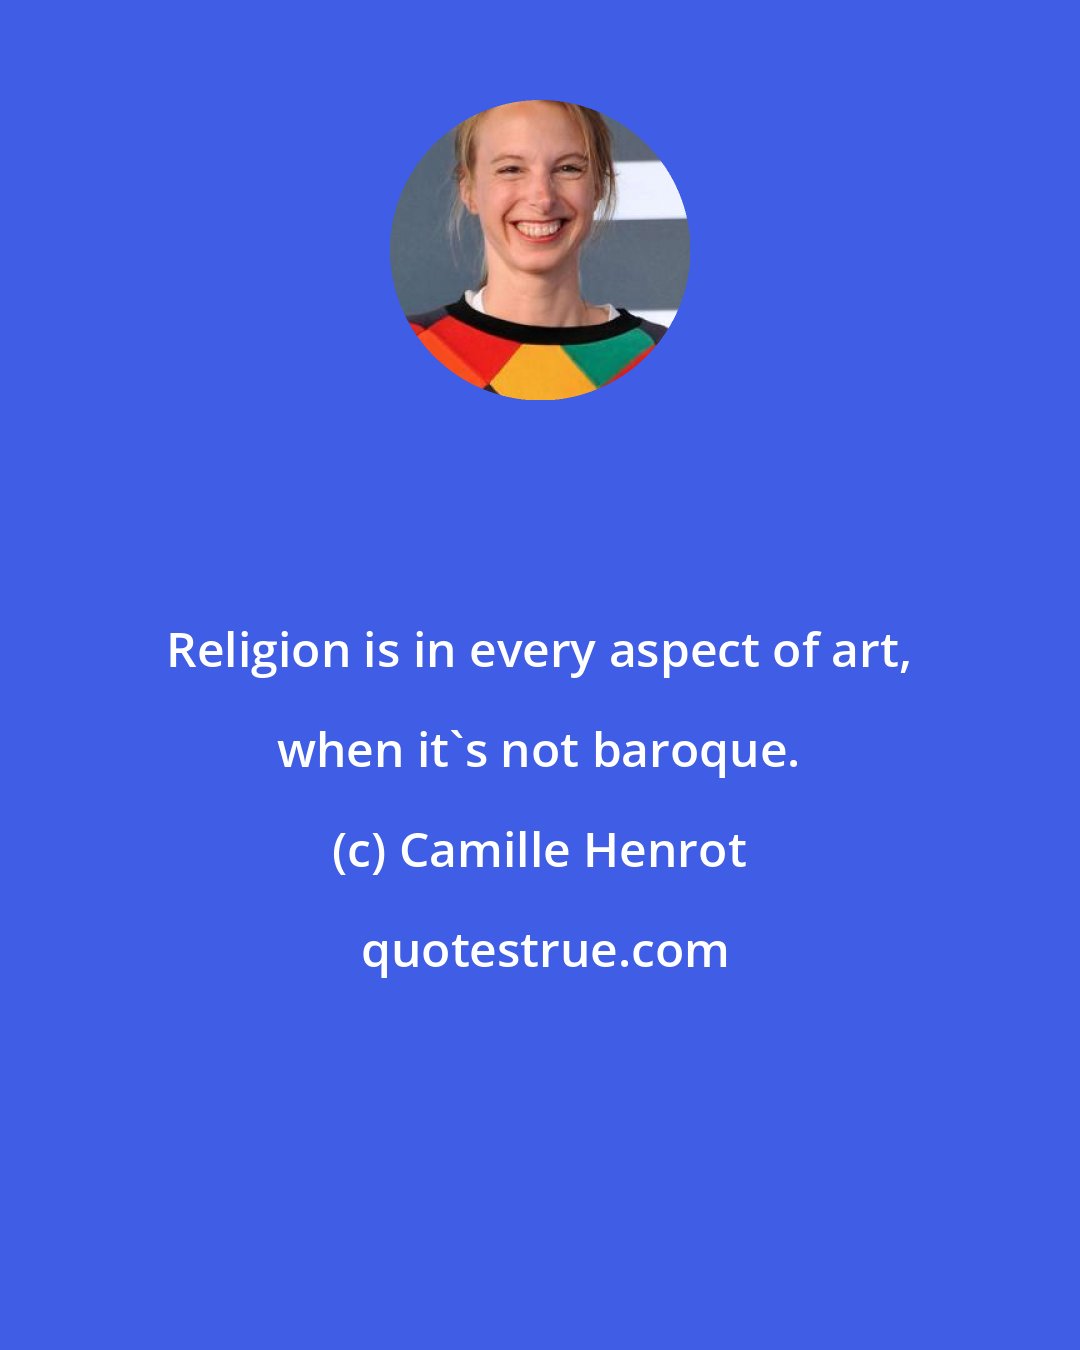 Camille Henrot: Religion is in every aspect of art, when it's not baroque.